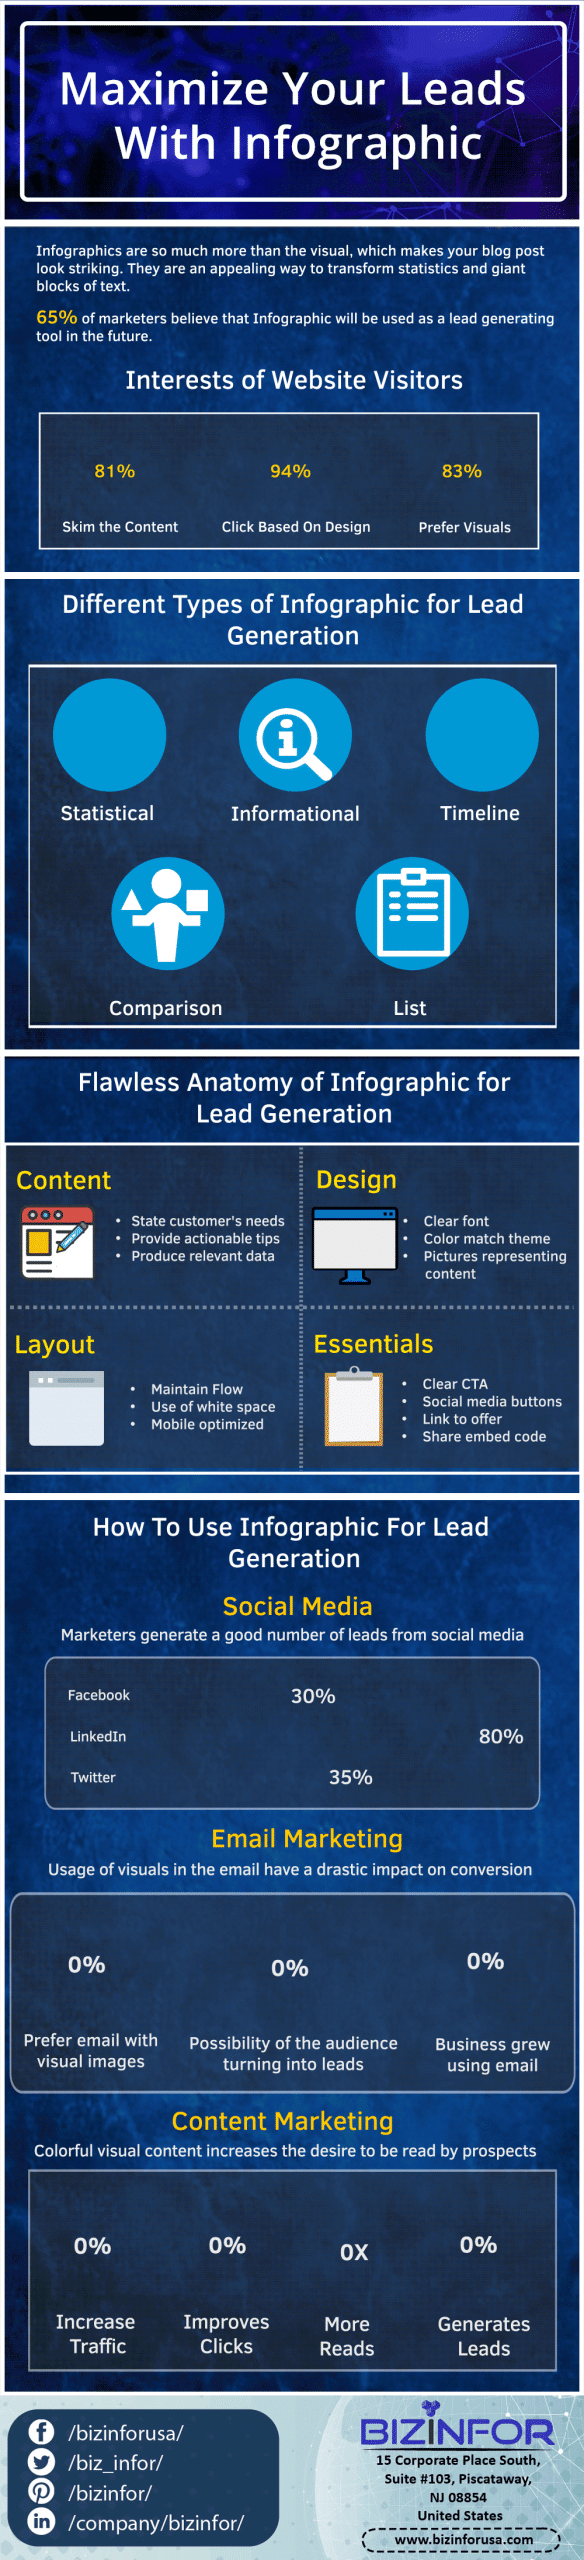 Maximize-your-leads-with-infographic